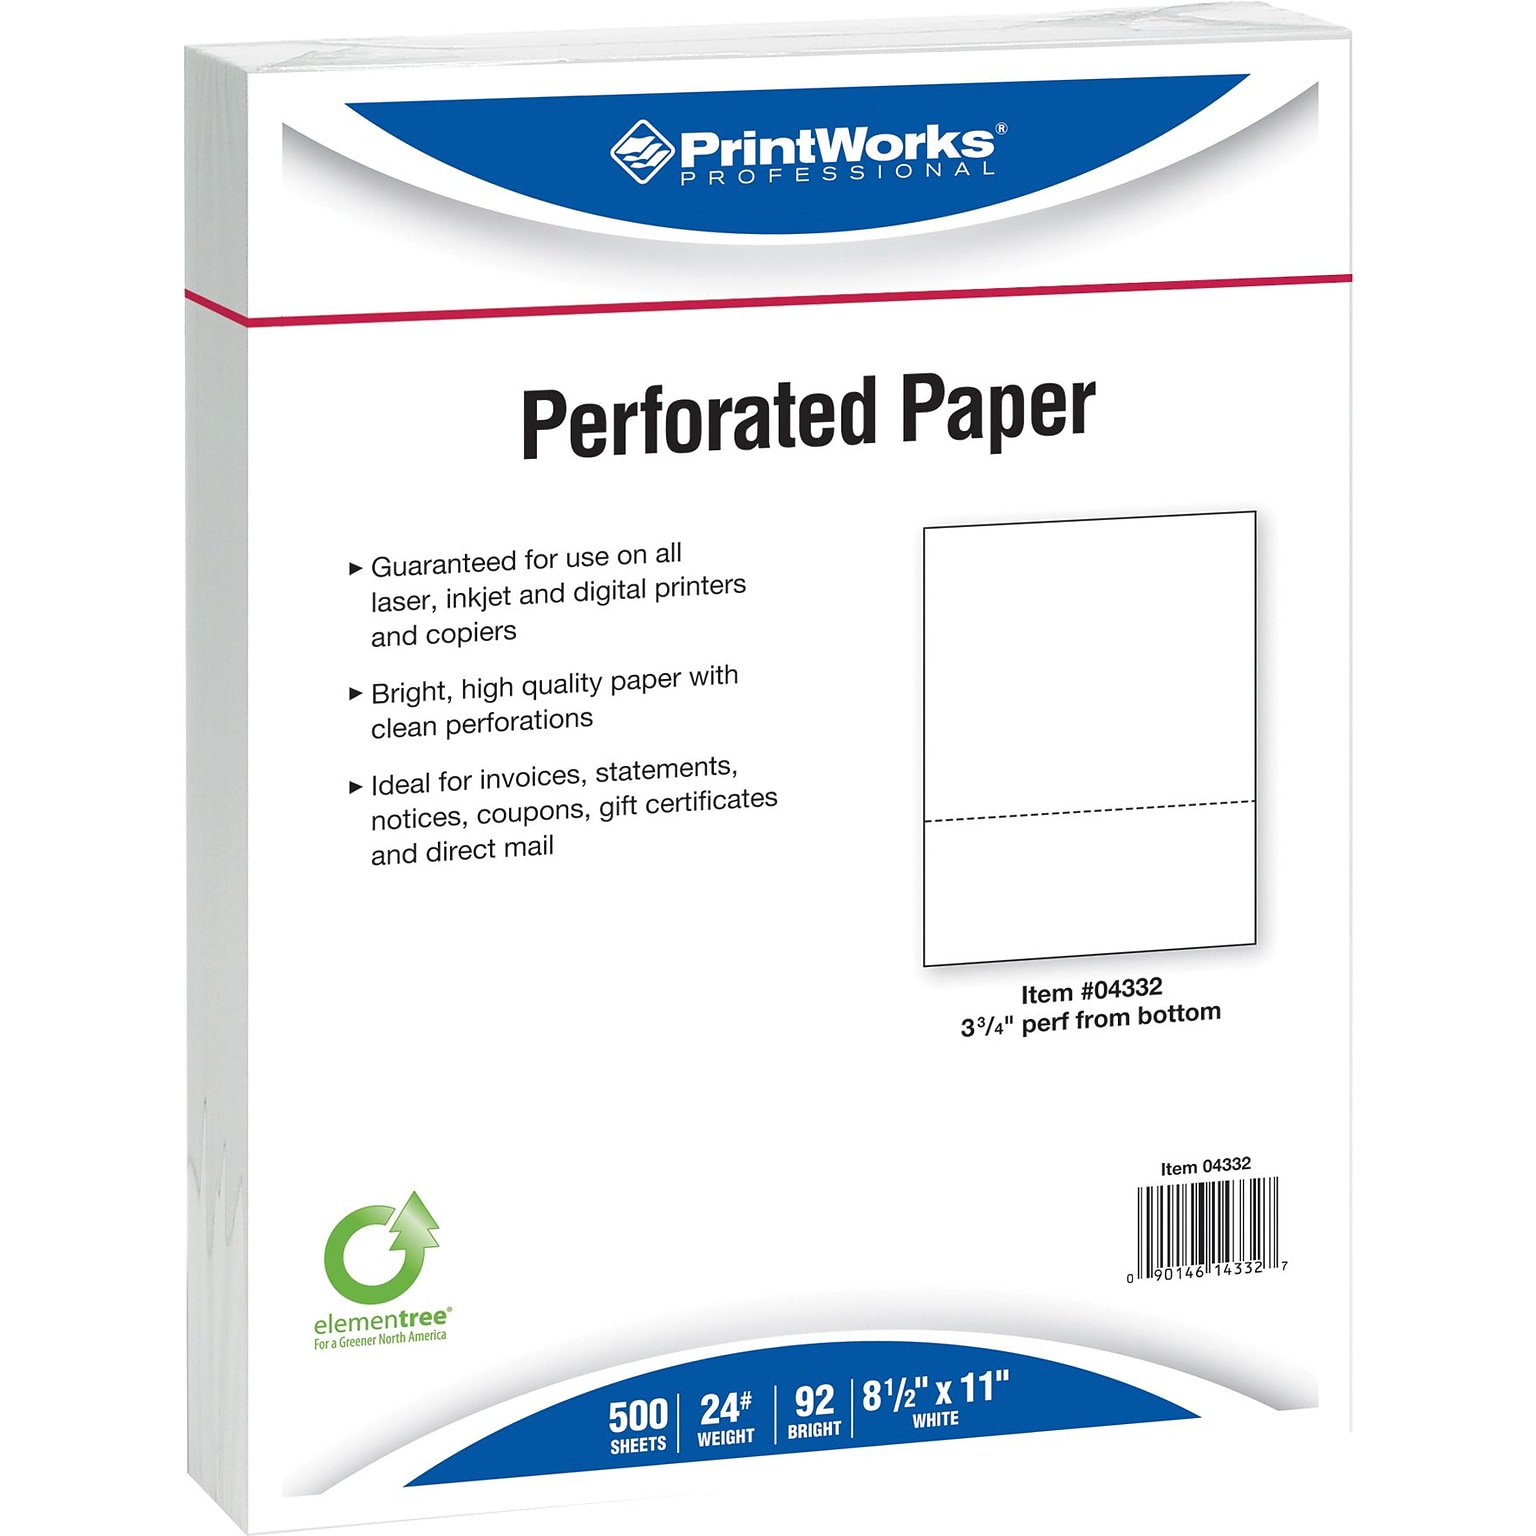 Printworks® Professional 8.5 x 11 Perforated Paper, 24 lbs., 92 Brightness, 2500 Sheets/Carton (04332P)